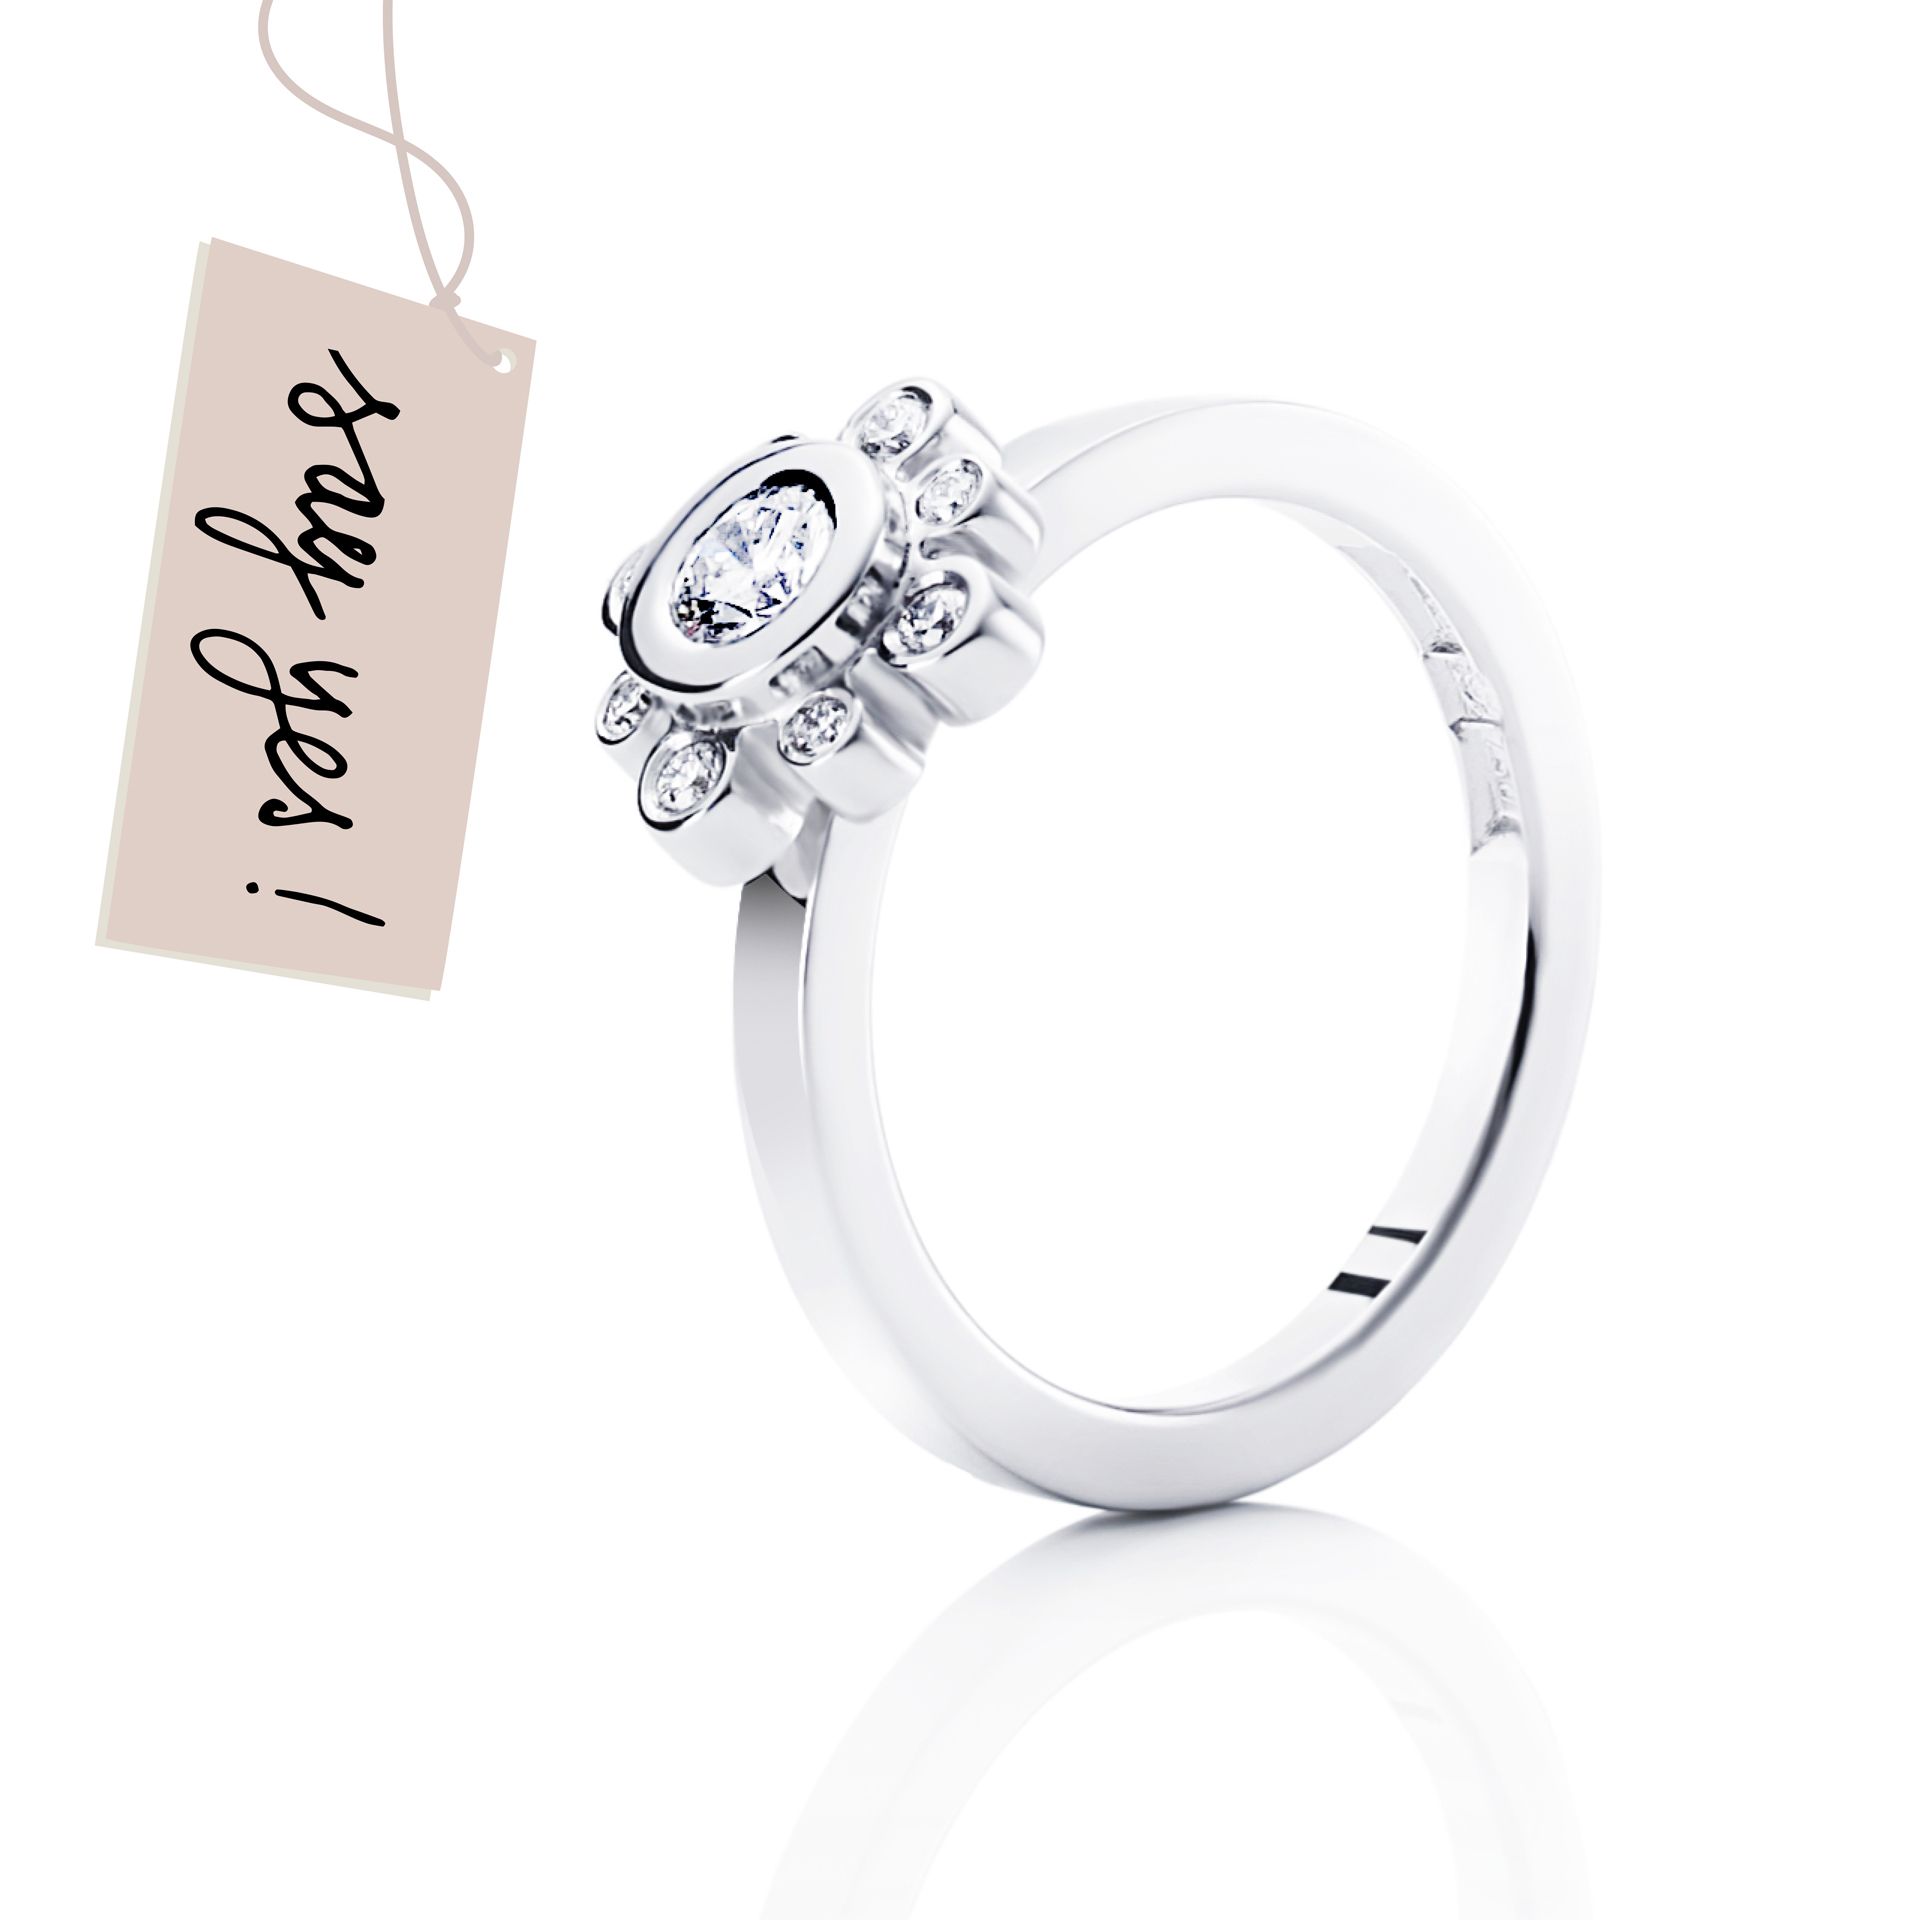 SWEET HEARTS CROWN RING 0.19 CT